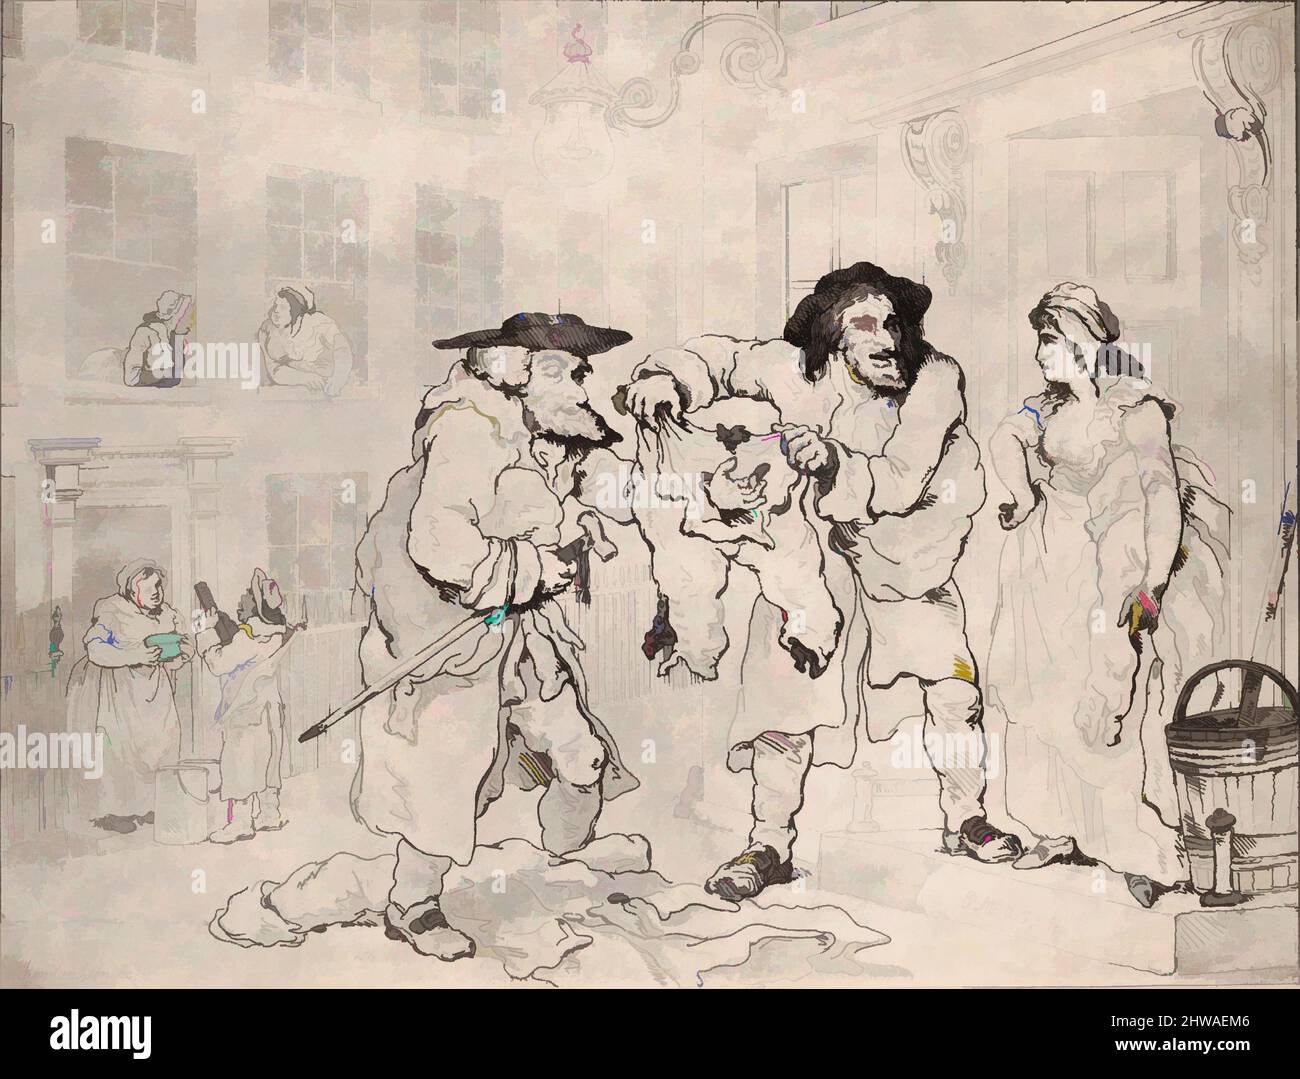 Art inspired by Traffic, Thomas Rowlandson, British, London 1757–1827 London), 1791, Classic works modernized by Artotop with a splash of modernity. Shapes, color and value, eye-catching visual impact on art. Emotions through freedom of artworks in a contemporary way. A timeless message pursuing a wildly creative new direction. Artists turning to the digital medium and creating the Artotop NFT Stock Photo